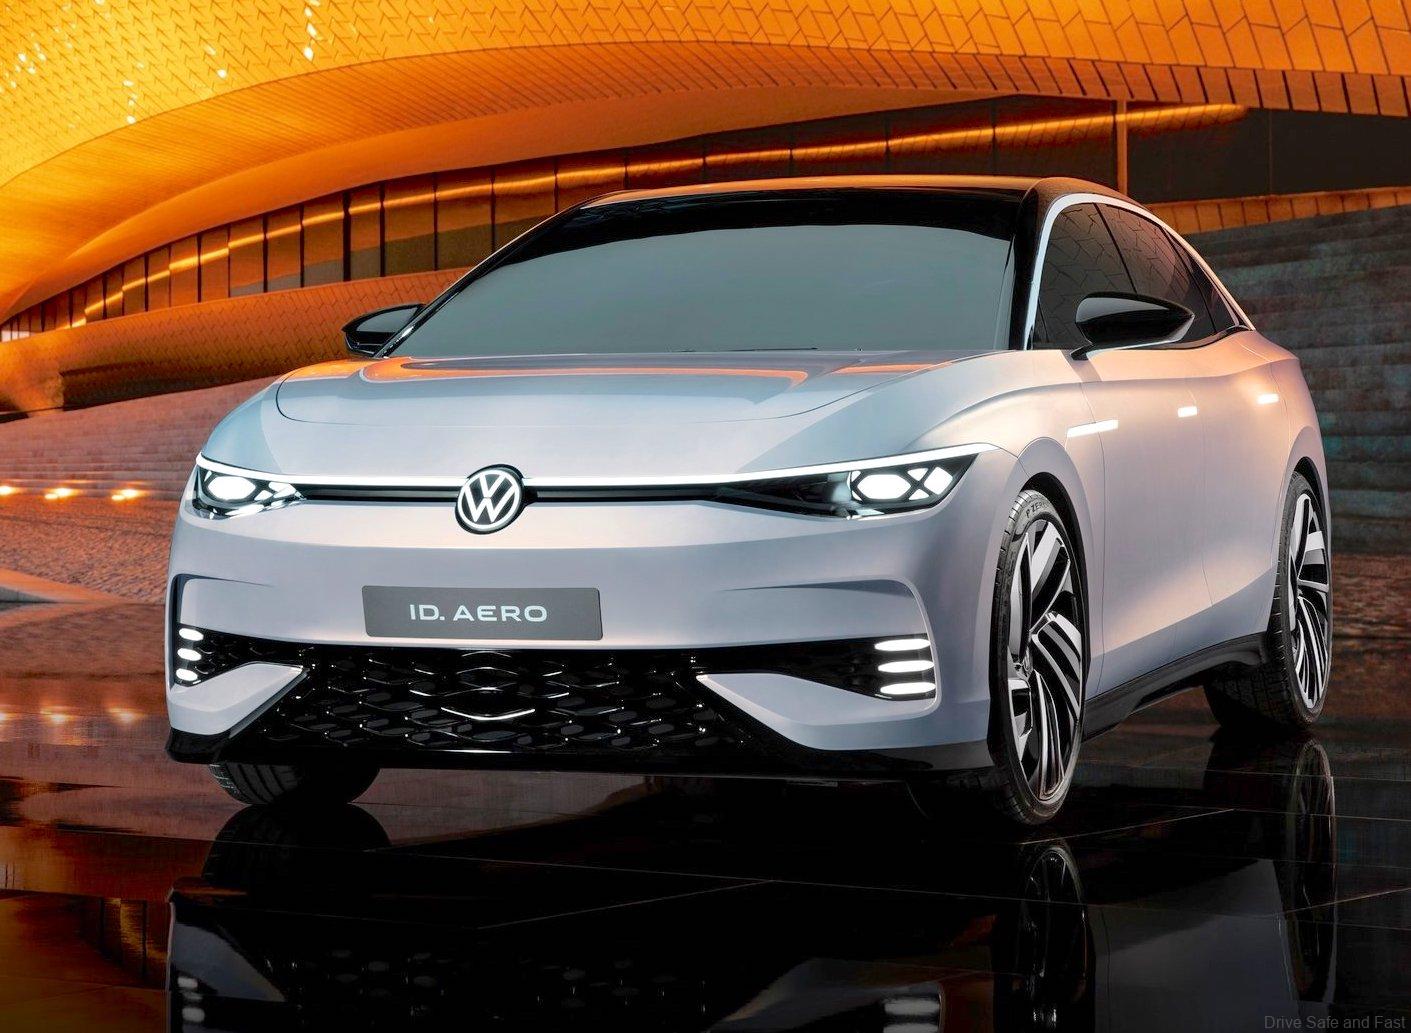 Next-Gen Volkswagen ICE Cars Will Be The Last From The Brand